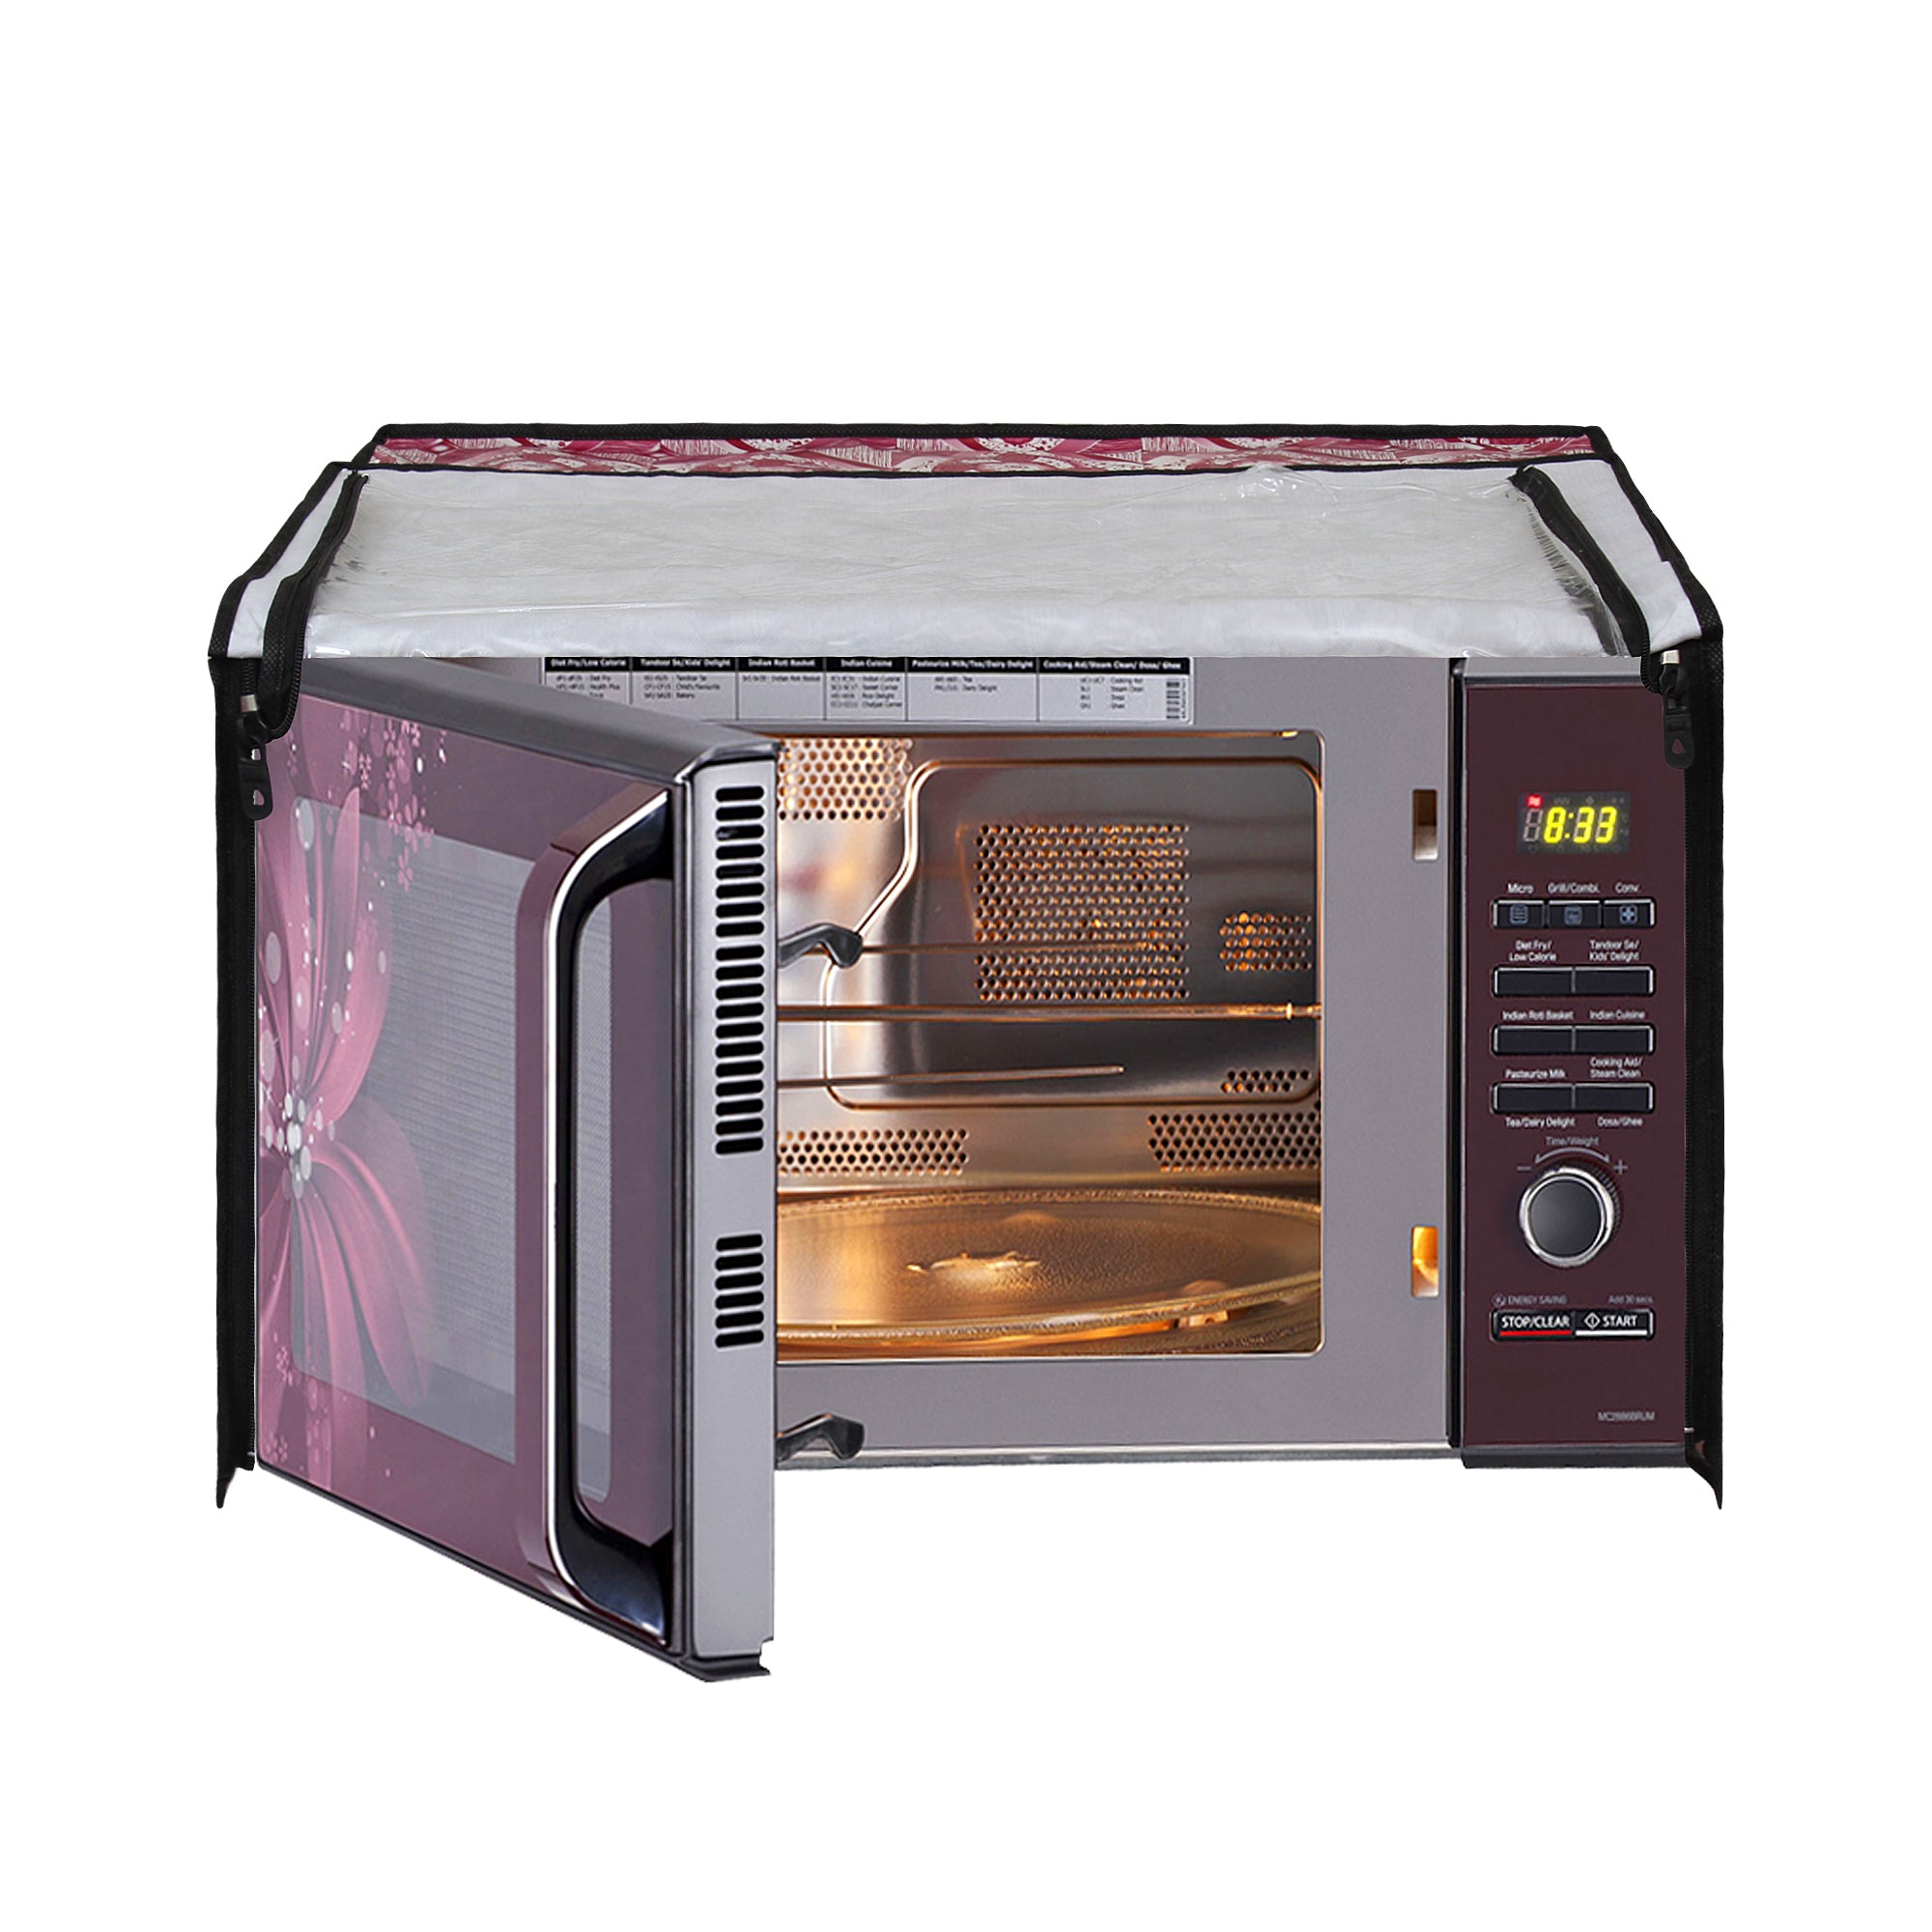 Microwave Oven Cover With Adjustable Front Zipper, SA55 - Dream Care Furnishings Private Limited